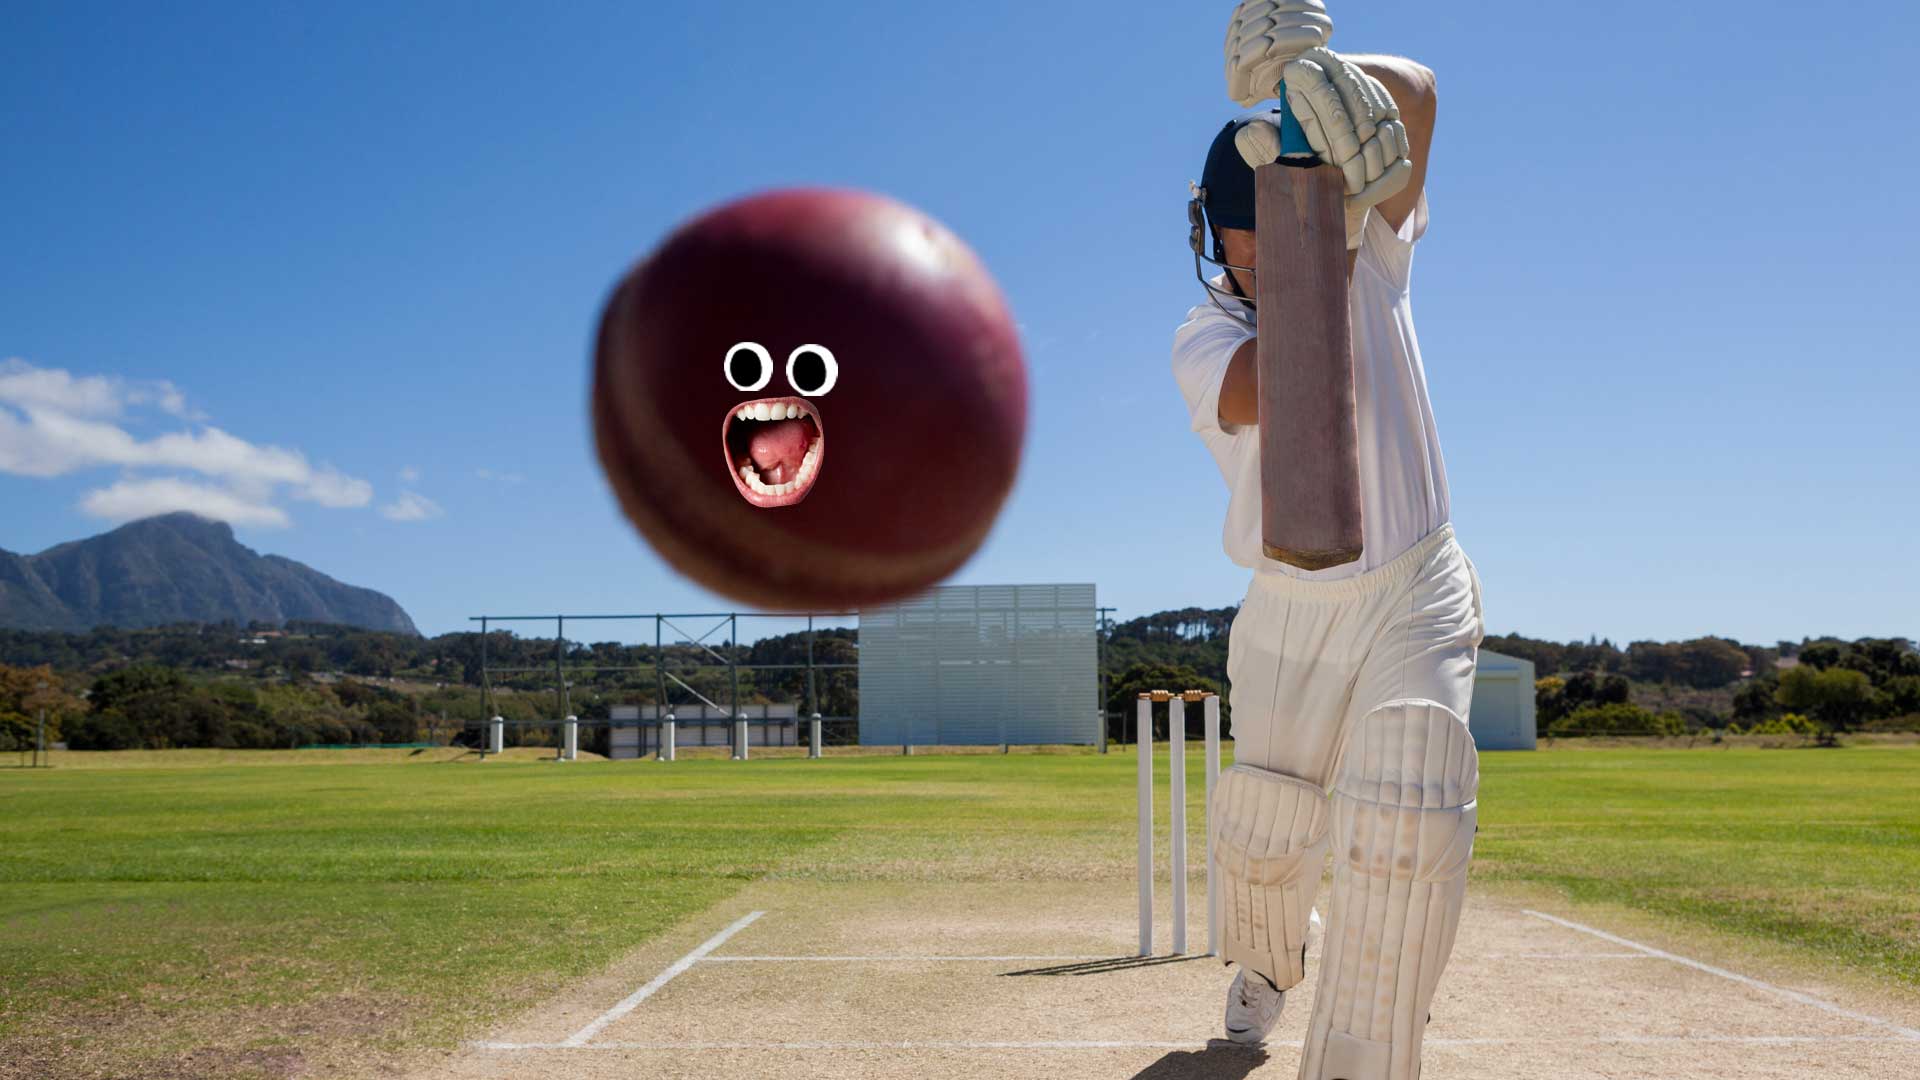 A cricket ball being smashed for a six, at least